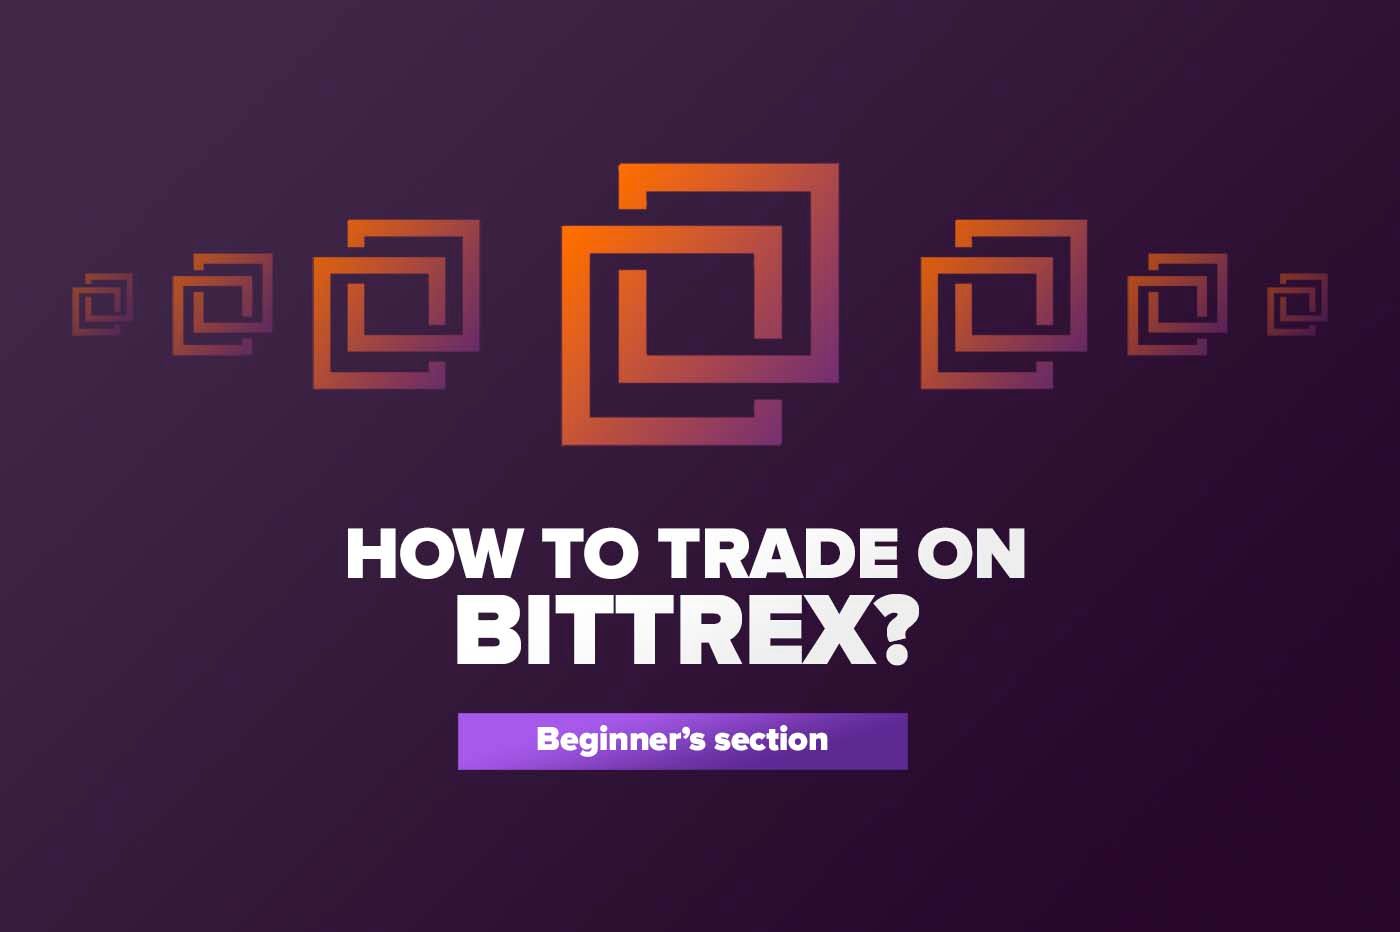 Article How to trade on Bittrex?